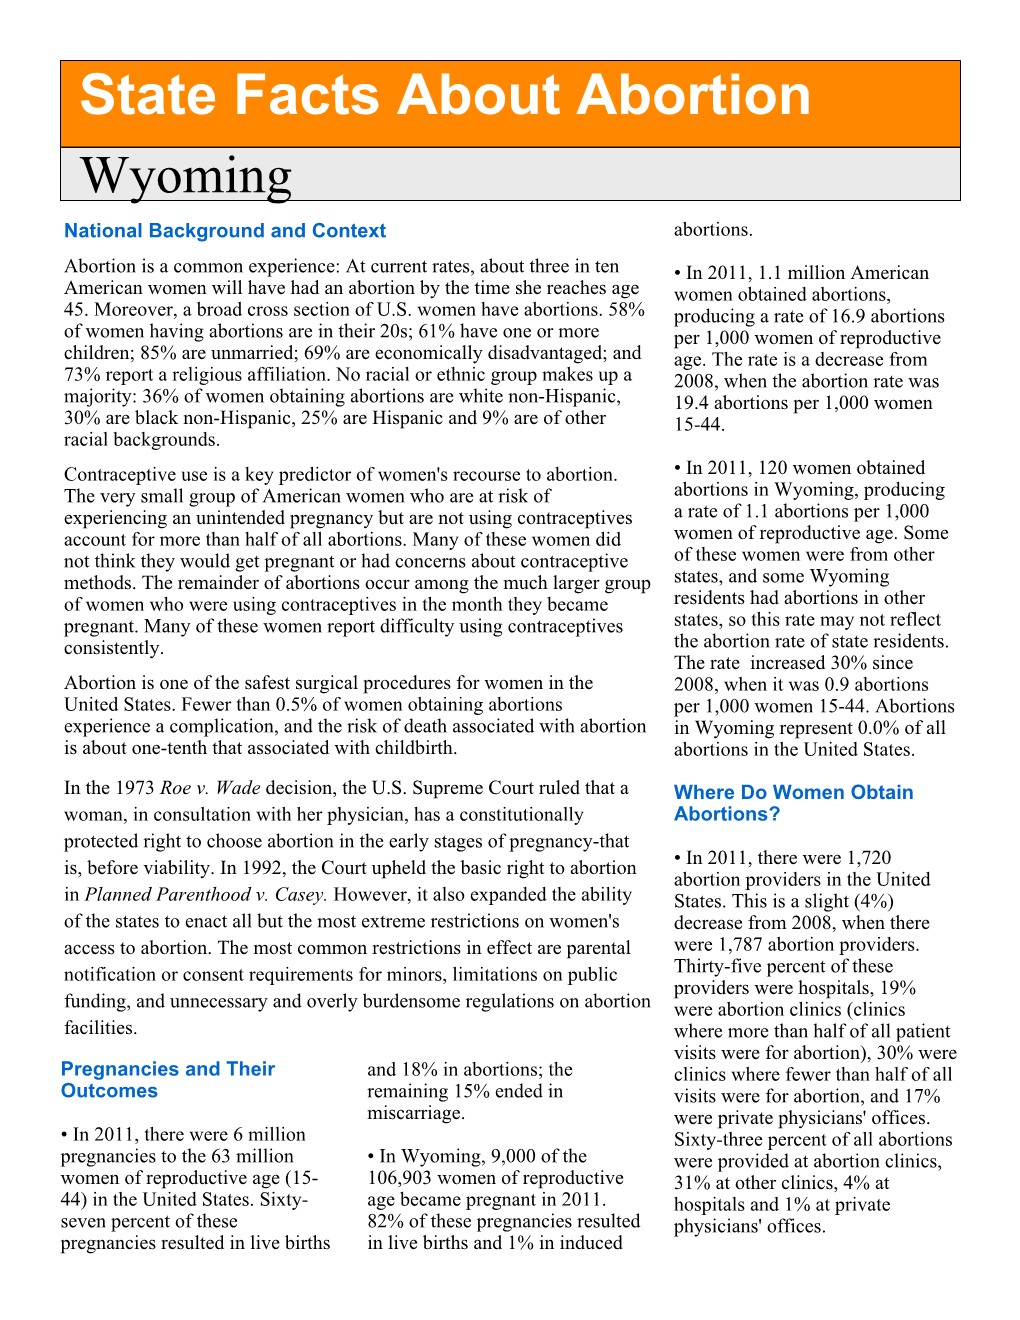 State Facts About Abortion Wyoming National Background and Context Abortions